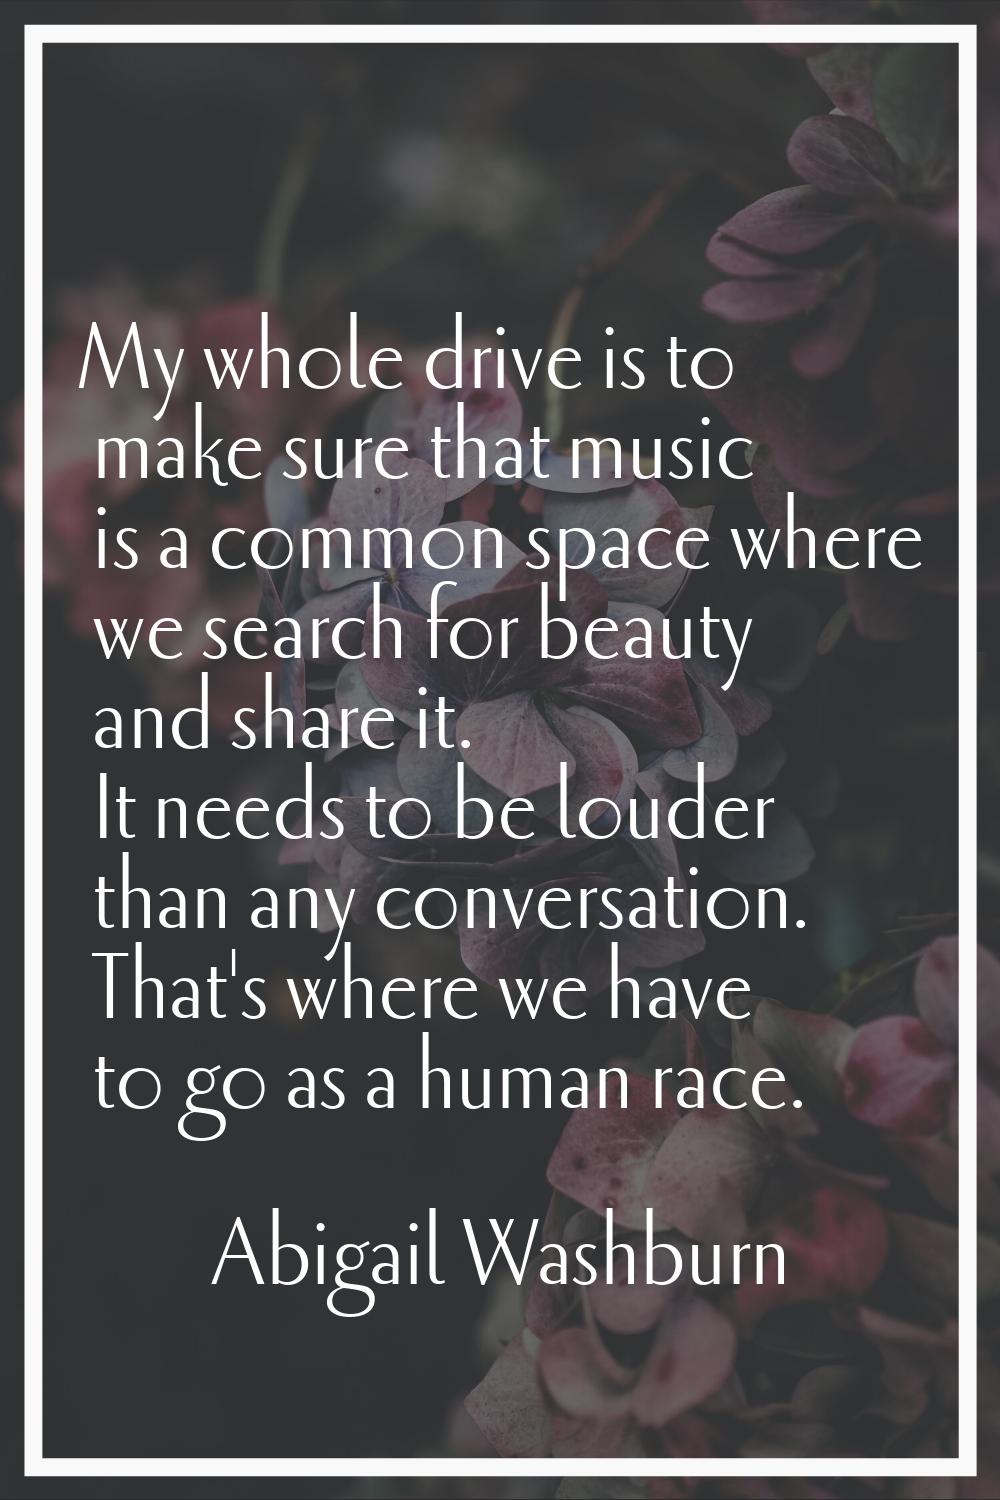 My whole drive is to make sure that music is a common space where we search for beauty and share it